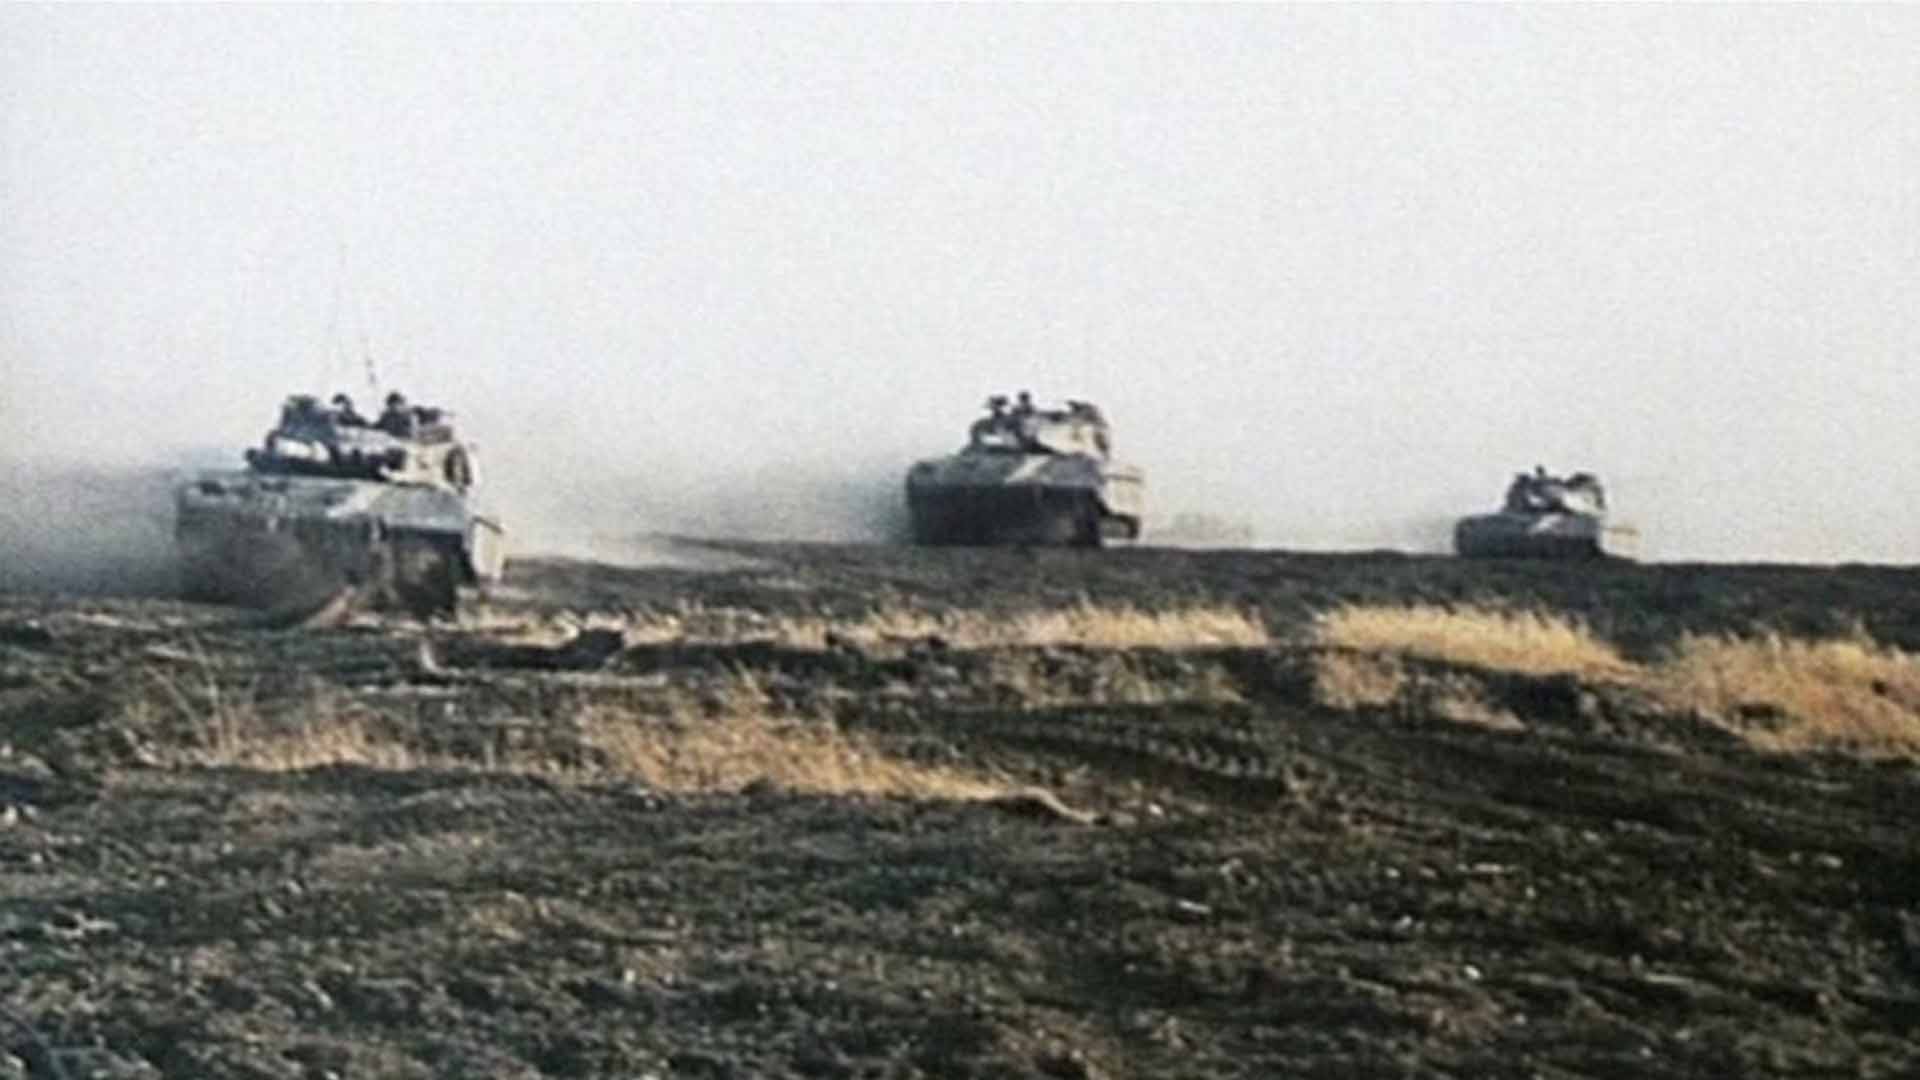 A number of tanks in the movie Tsahal